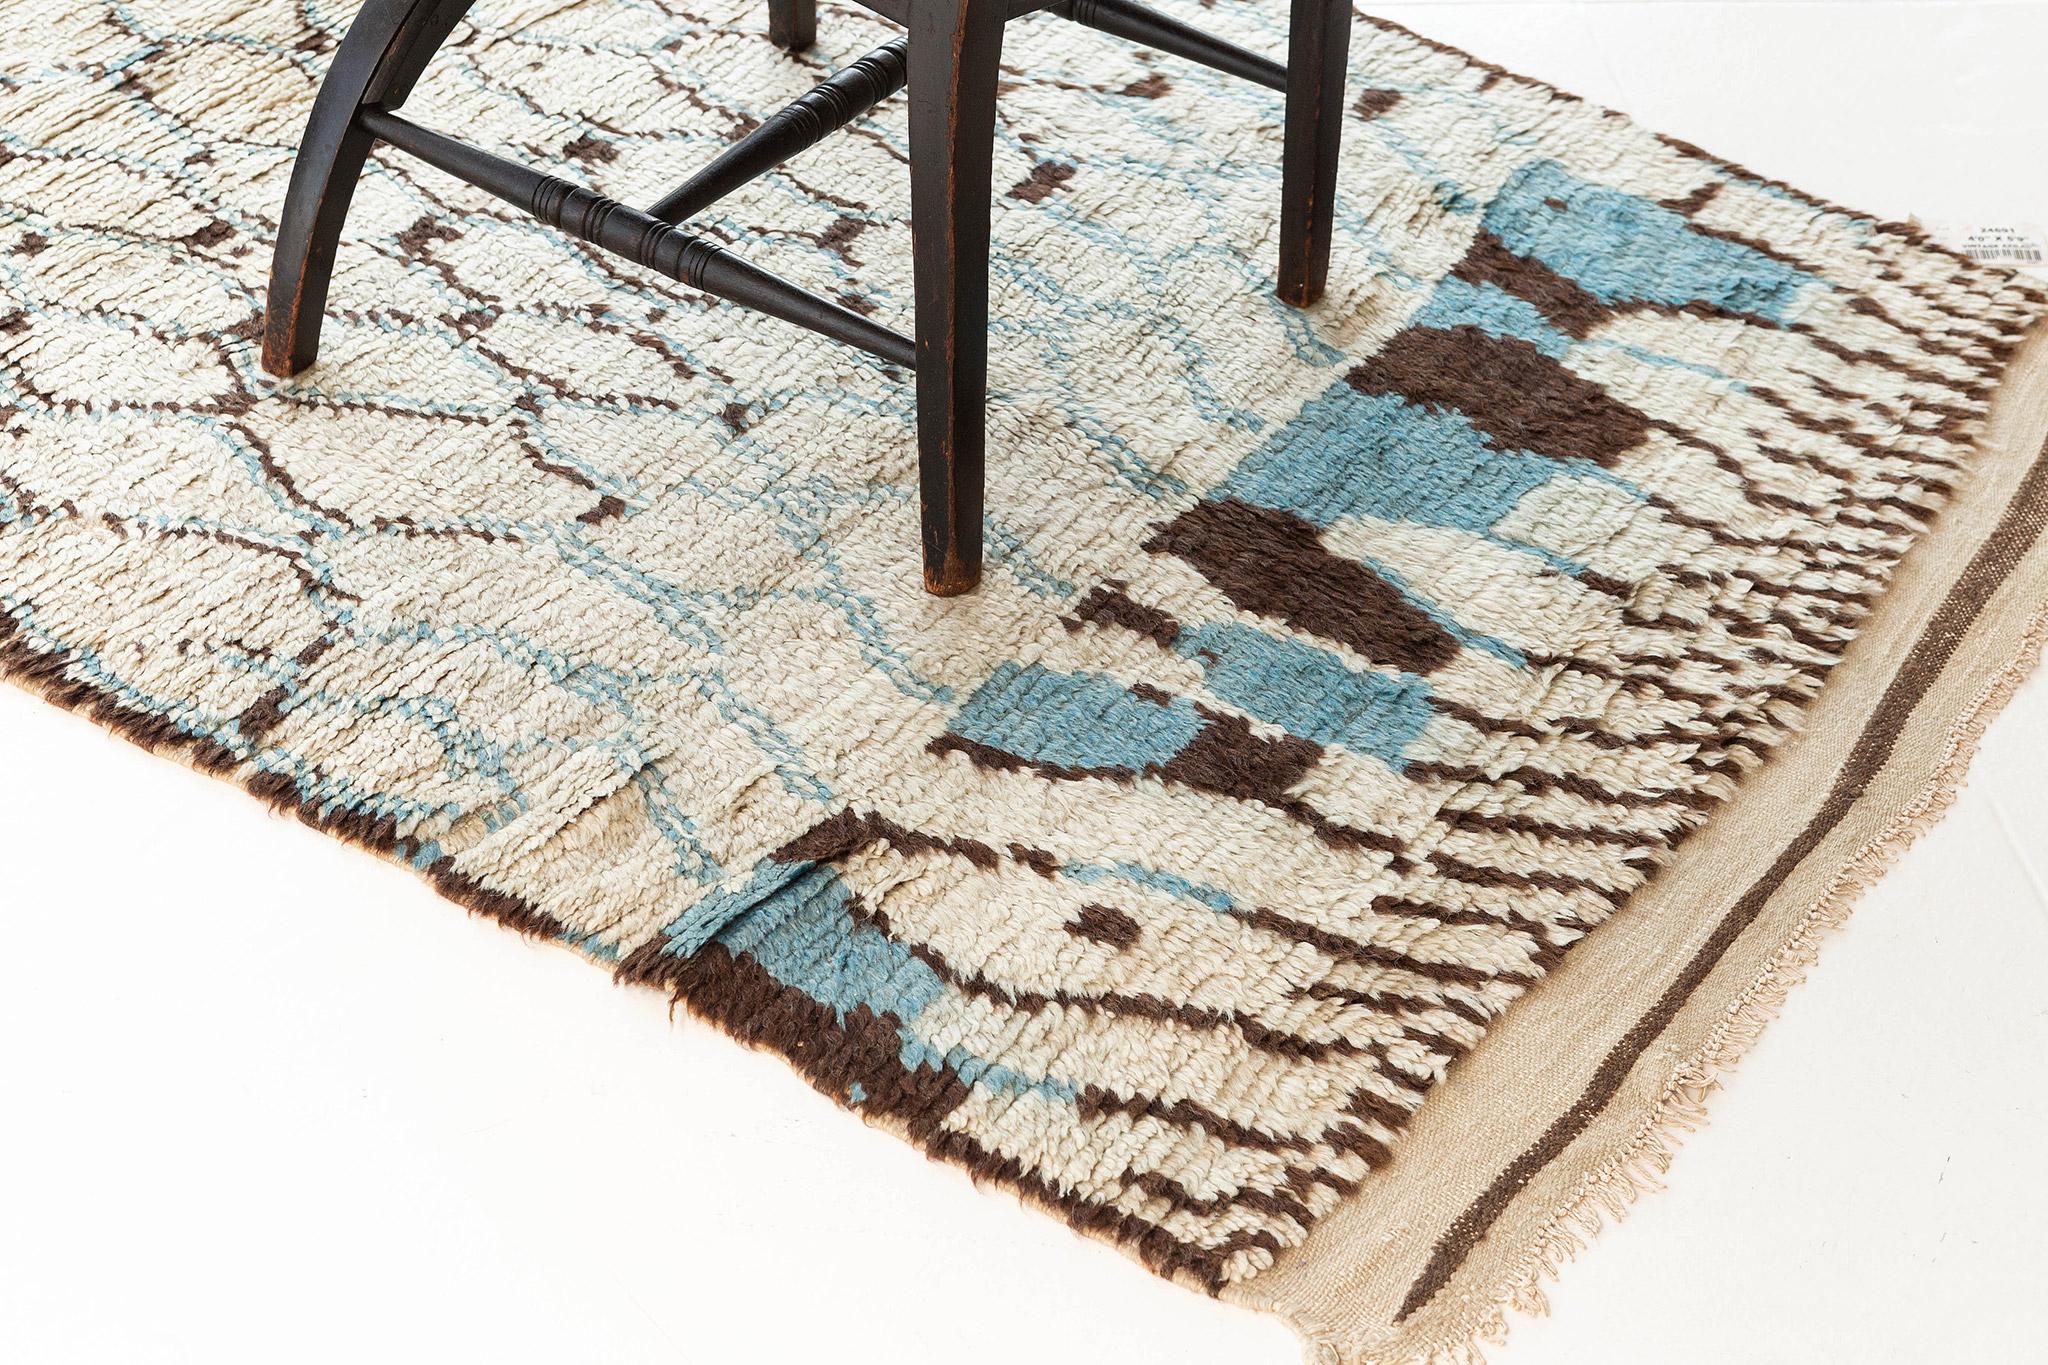 A majestic Moroccan rug in Azilal Tribe that displays a remarkable style reminiscent of a crocodile skin. This fascinating plush rug emanates chic yet sophisticated vibe. The blue outlined lines crisscross in an organic manner, creating a handsomely